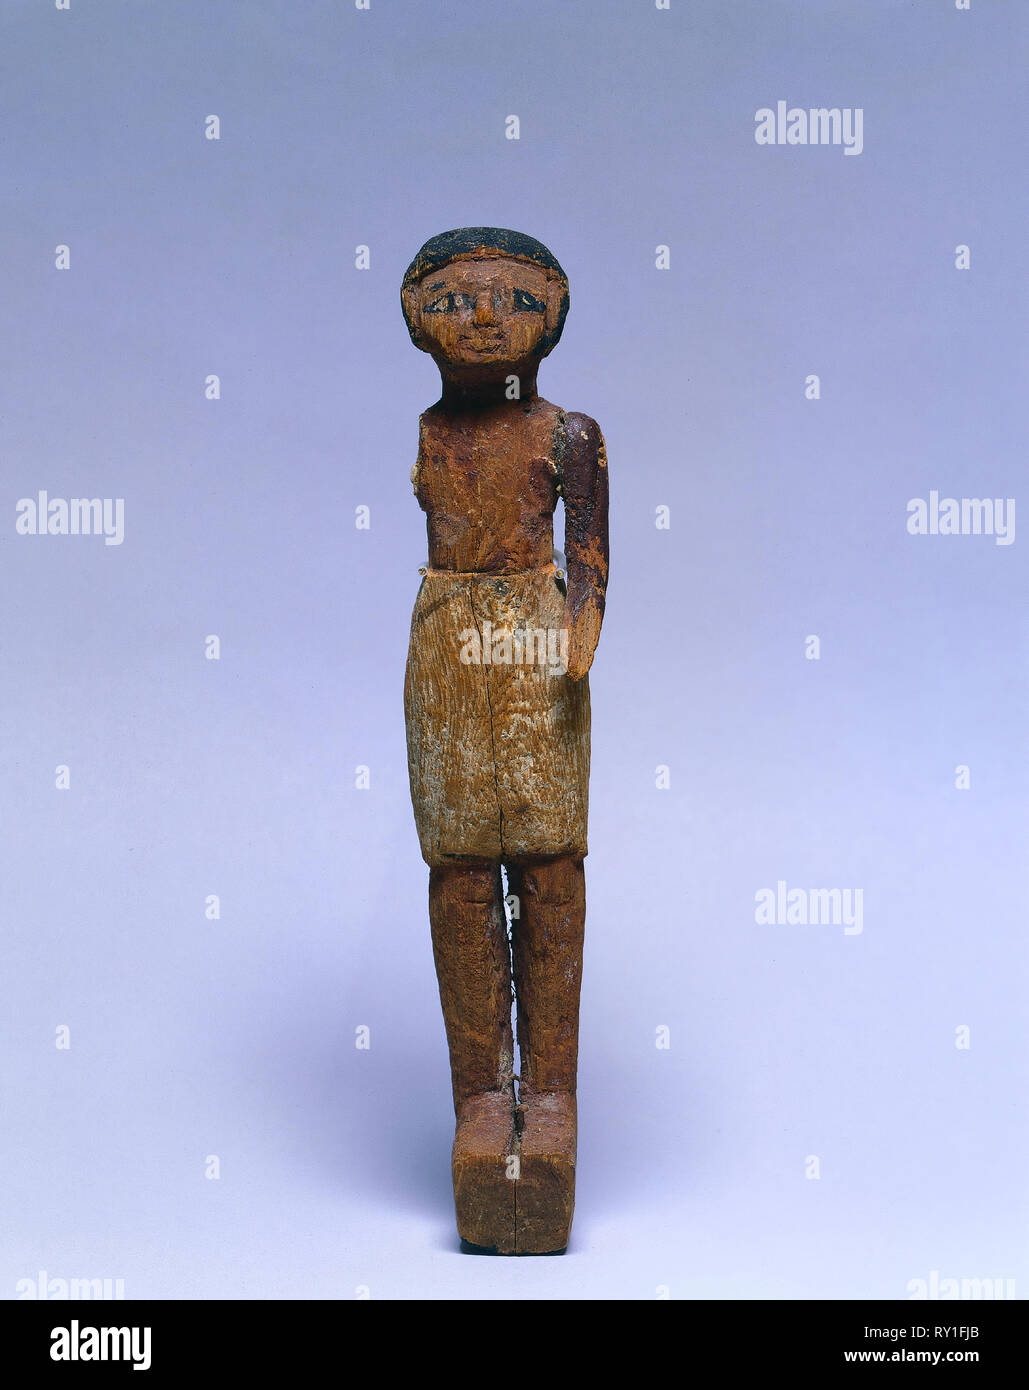 Model Figure of a Man, 1980-1801 BC. Egypt, Middle Kingdom, Dynasty 12, 1980-1801 BC. Painted wood; overall: 22 x 5.2 x 3.6 cm (8 11/16 x 2 1/16 x 1 7/16 in Stock Photo